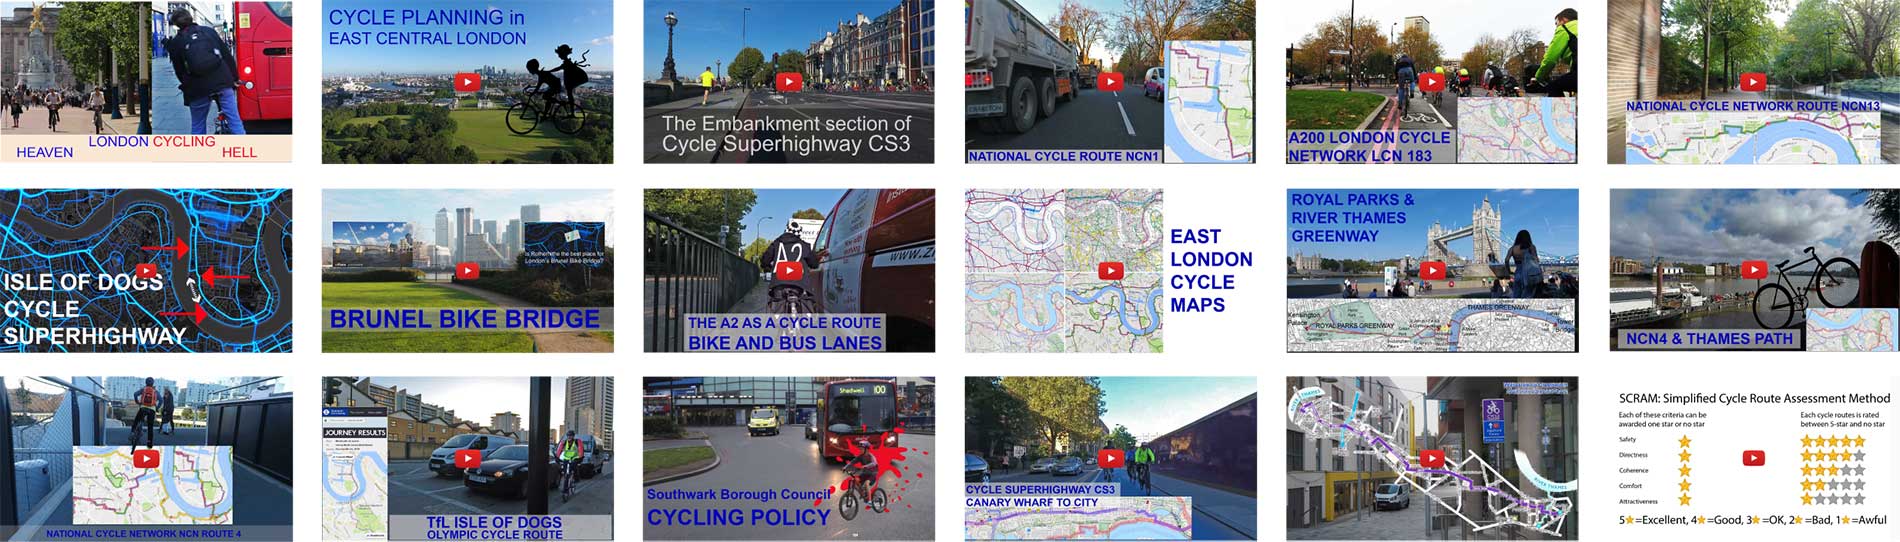 East Central London Cycle Network 18 videos